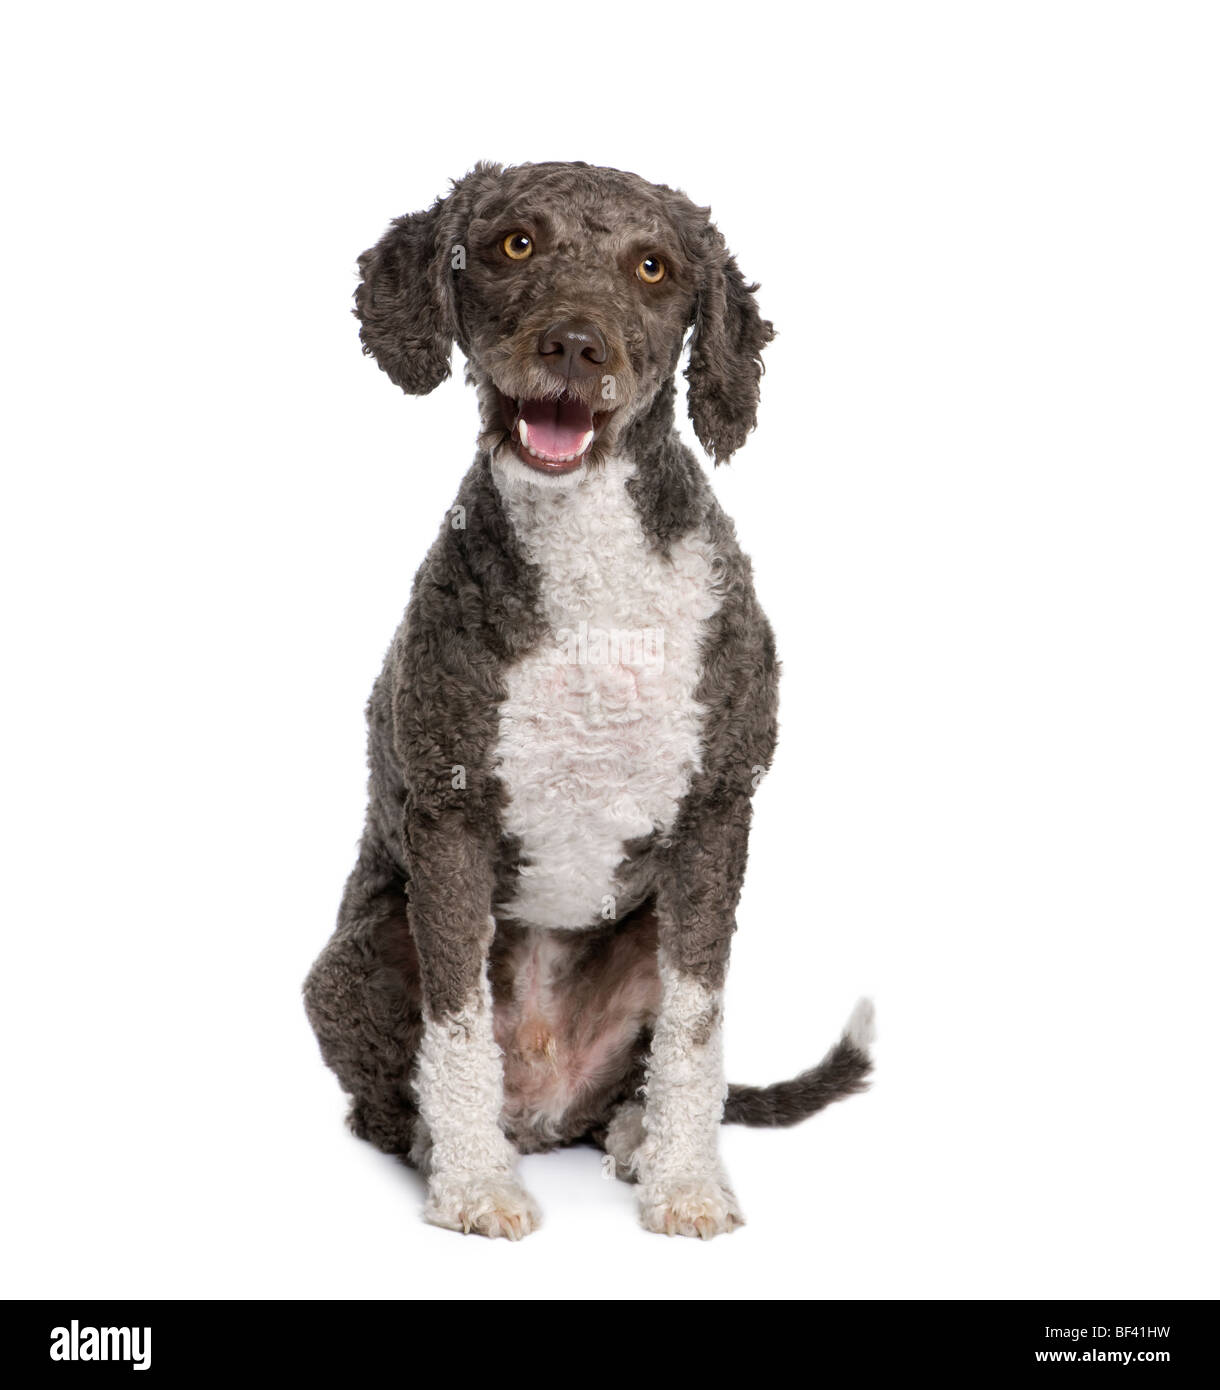 Spanish water spaniel dog, 3 years old, sitting in front of white background, studio shot Stock Photo